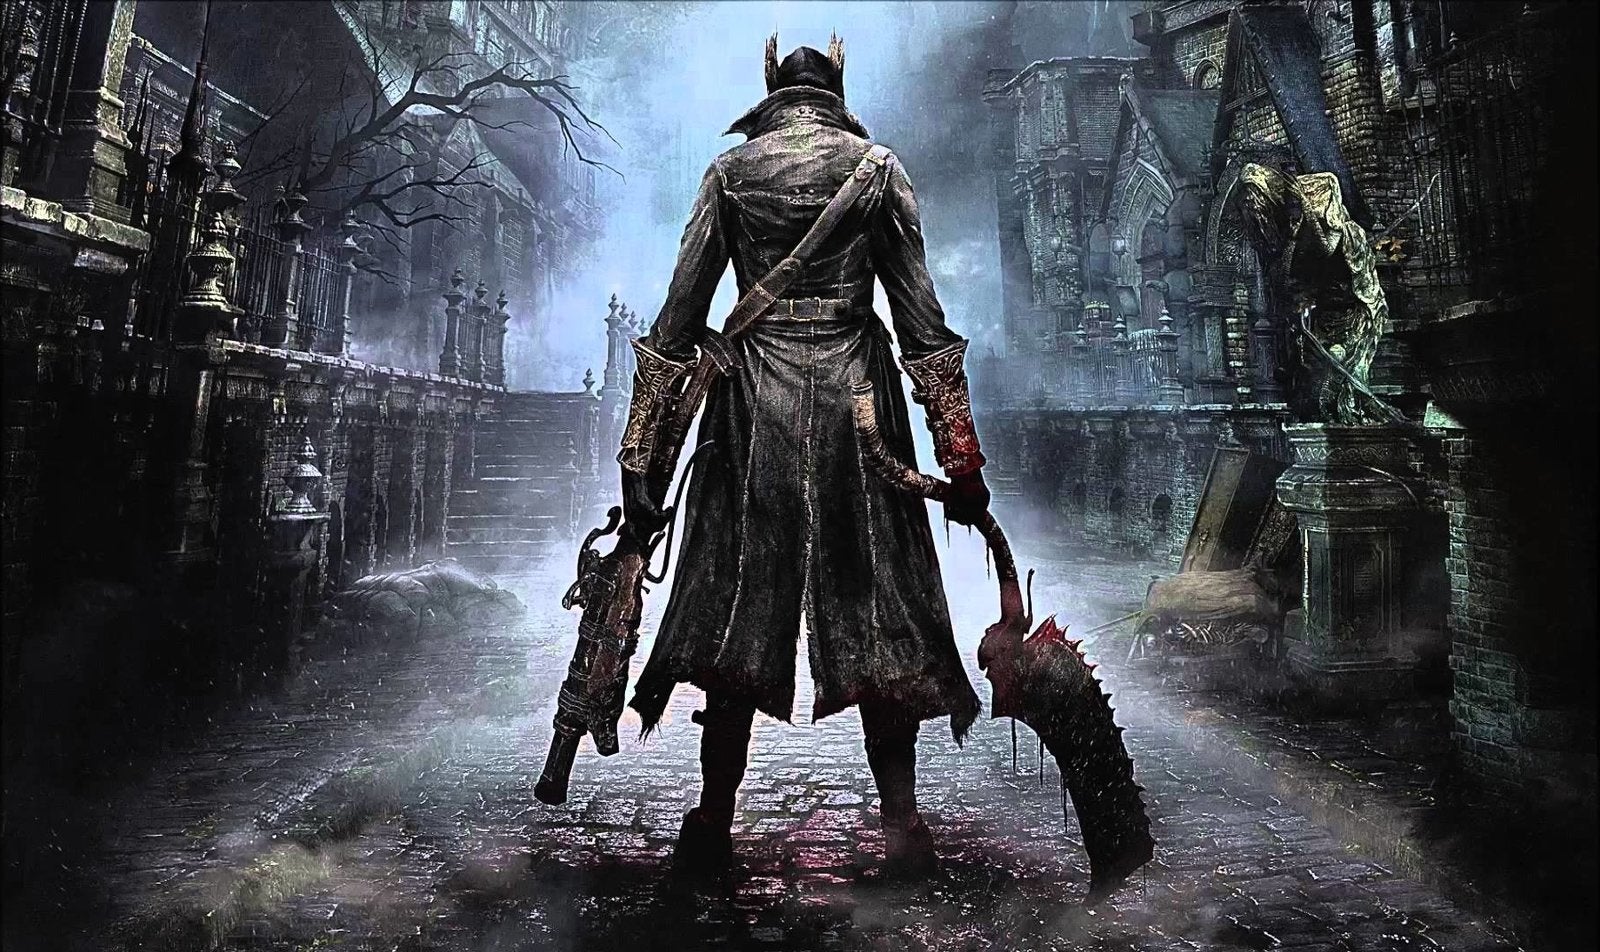 Image for Cursed cards deal: get up to 37% off Bloodborne and Arkham Horror